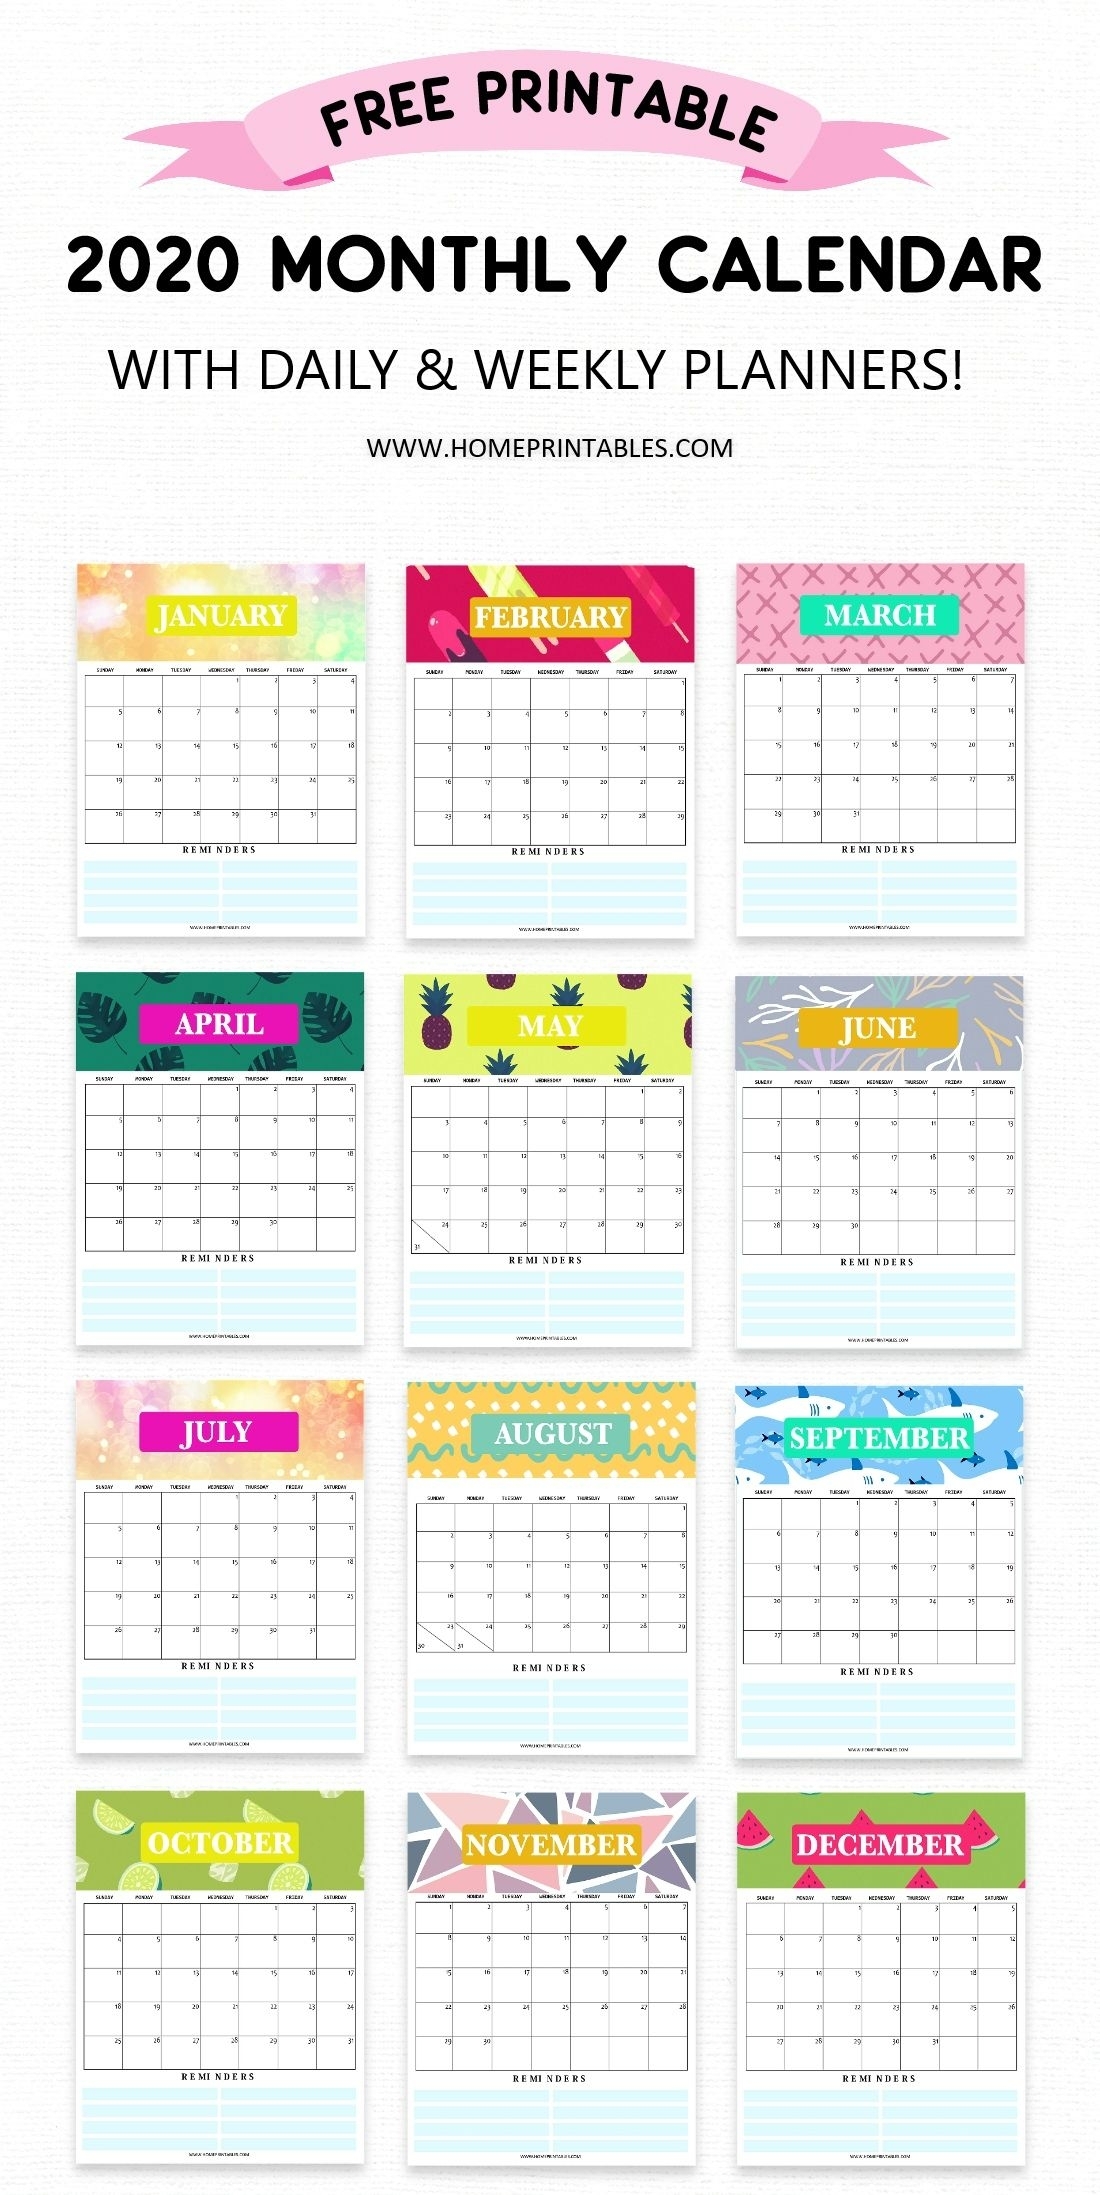 Collect Looking For Free Pocket Sized Yearly Calendars